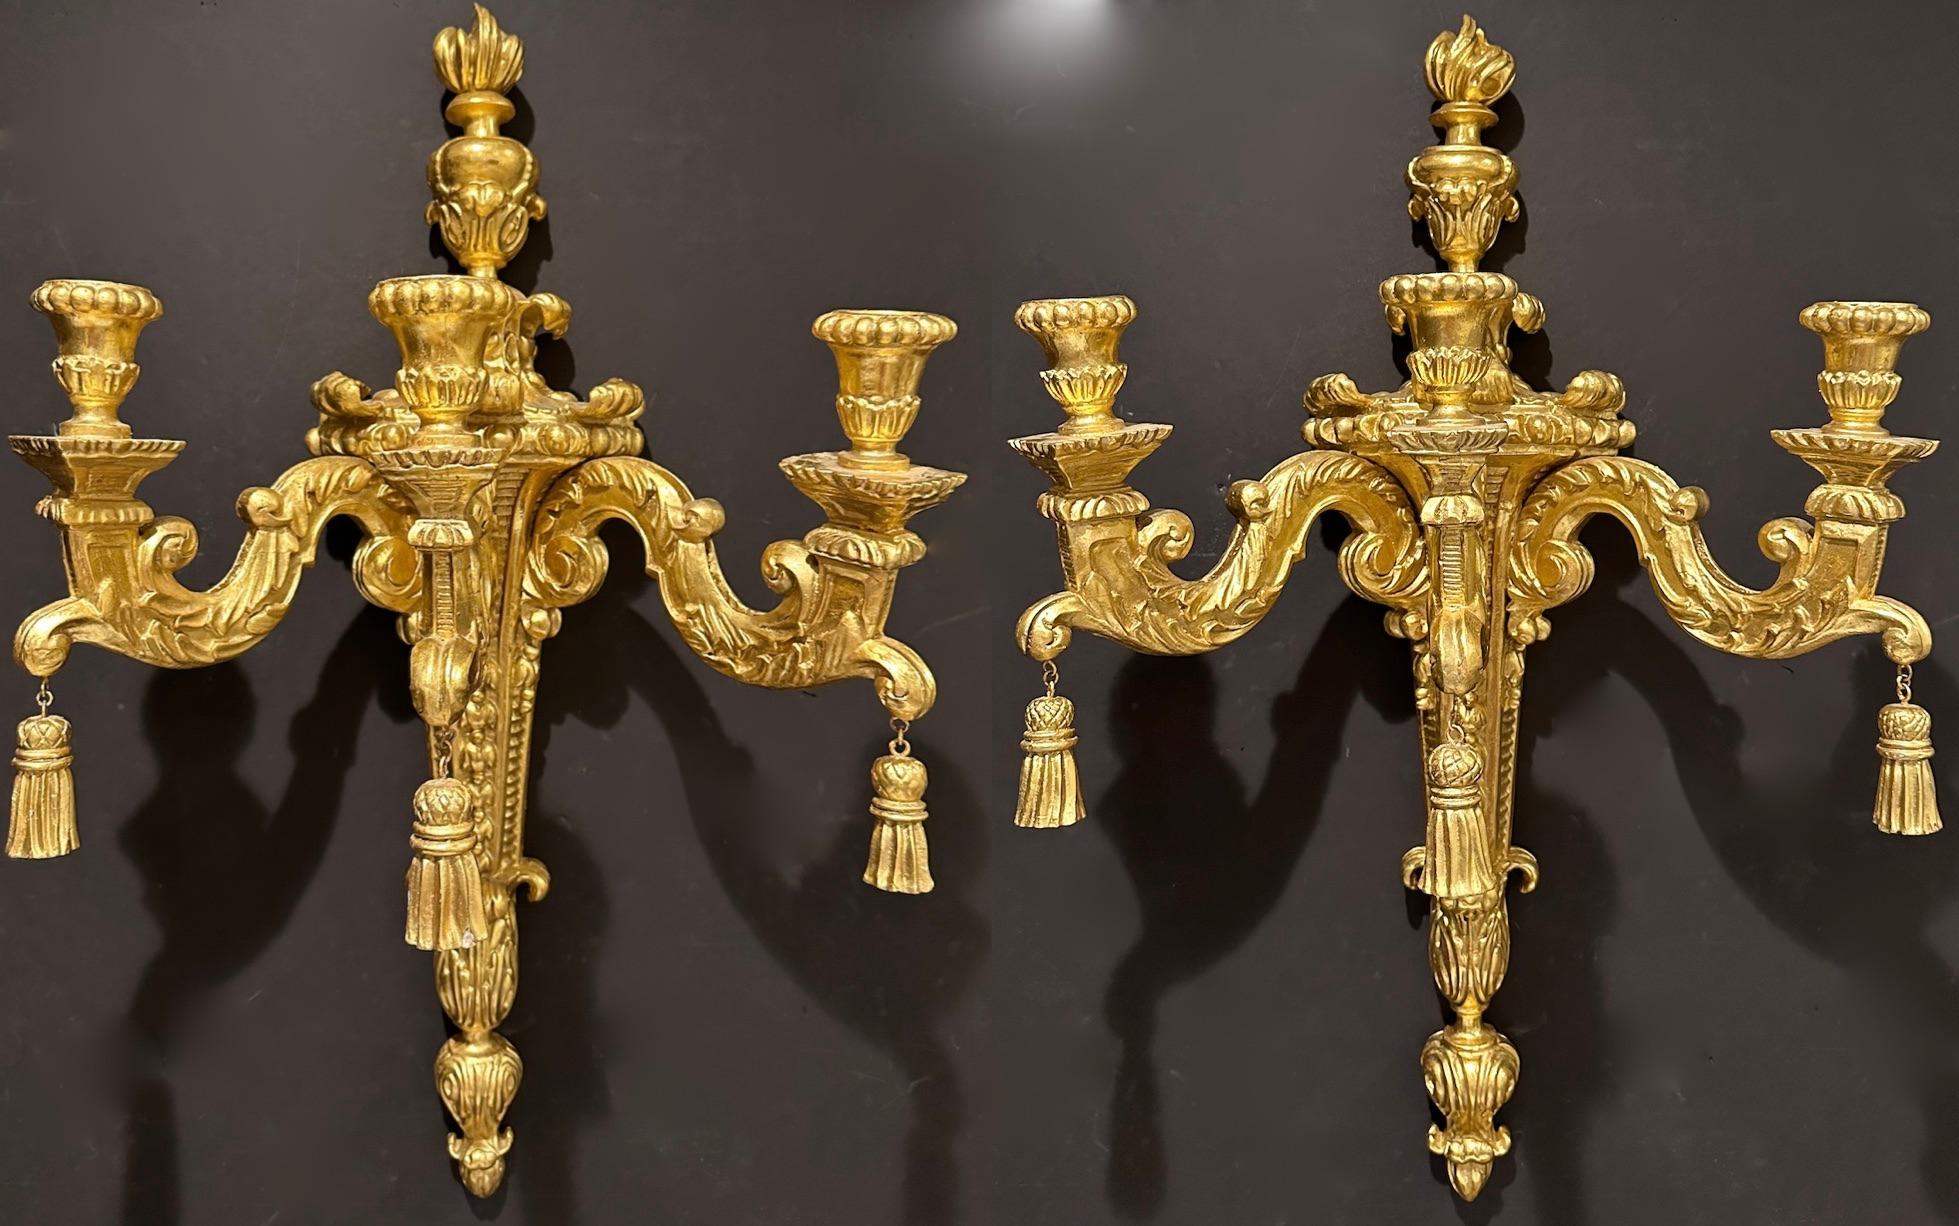 Large and impressive carved and gilt wood 3- arm wall sconces in the Louis XVI style. Urn and flame for top with tassels hanging from each arm.
These sconces are currently NOT wired for electricity, but could be.